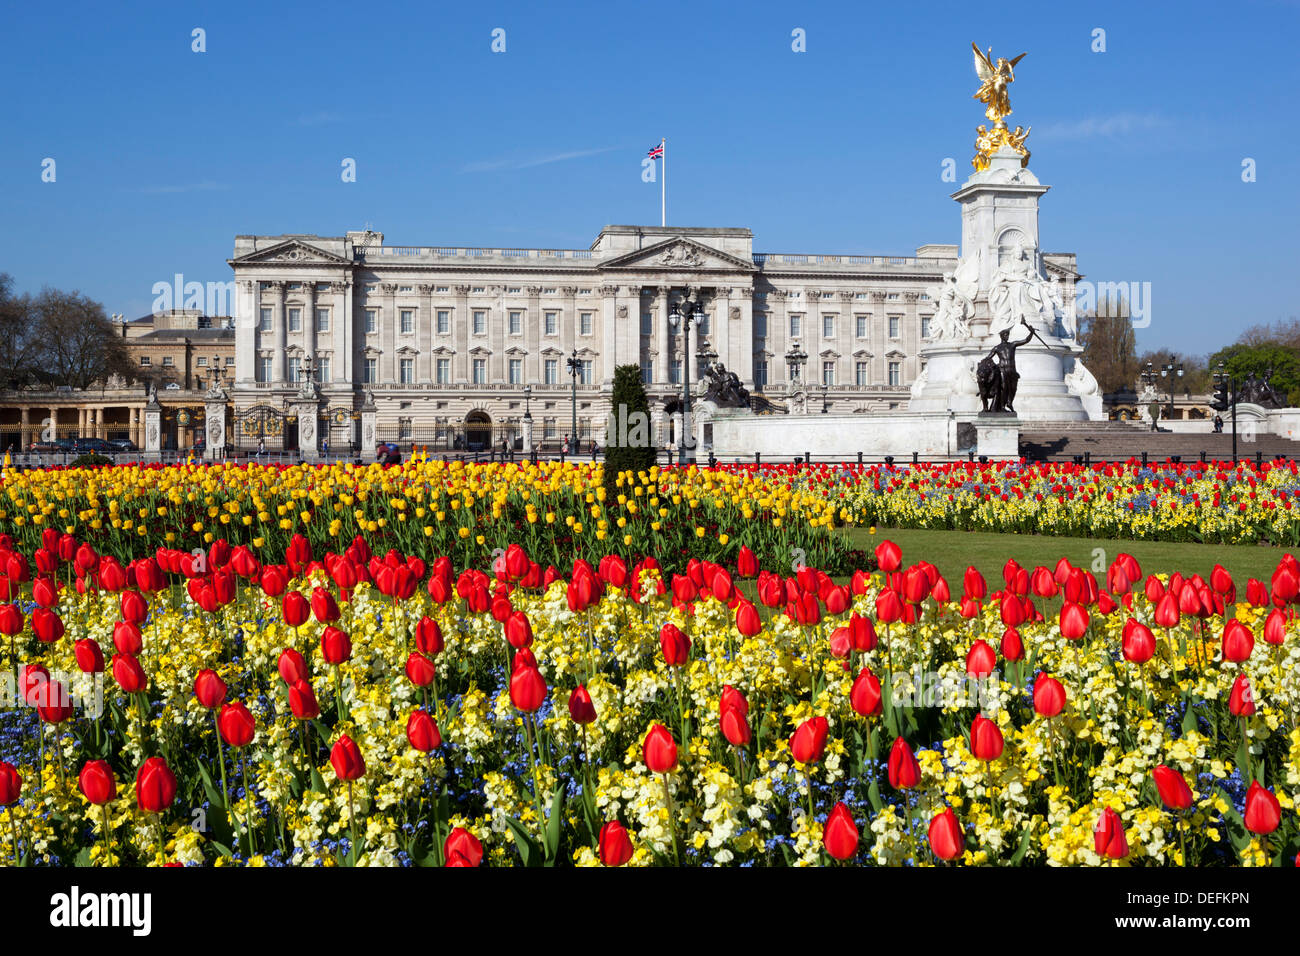 Buckingham Palace and Queen Victoria Monument with tulips, London, England, United Kingdom, Europe Stock Photo